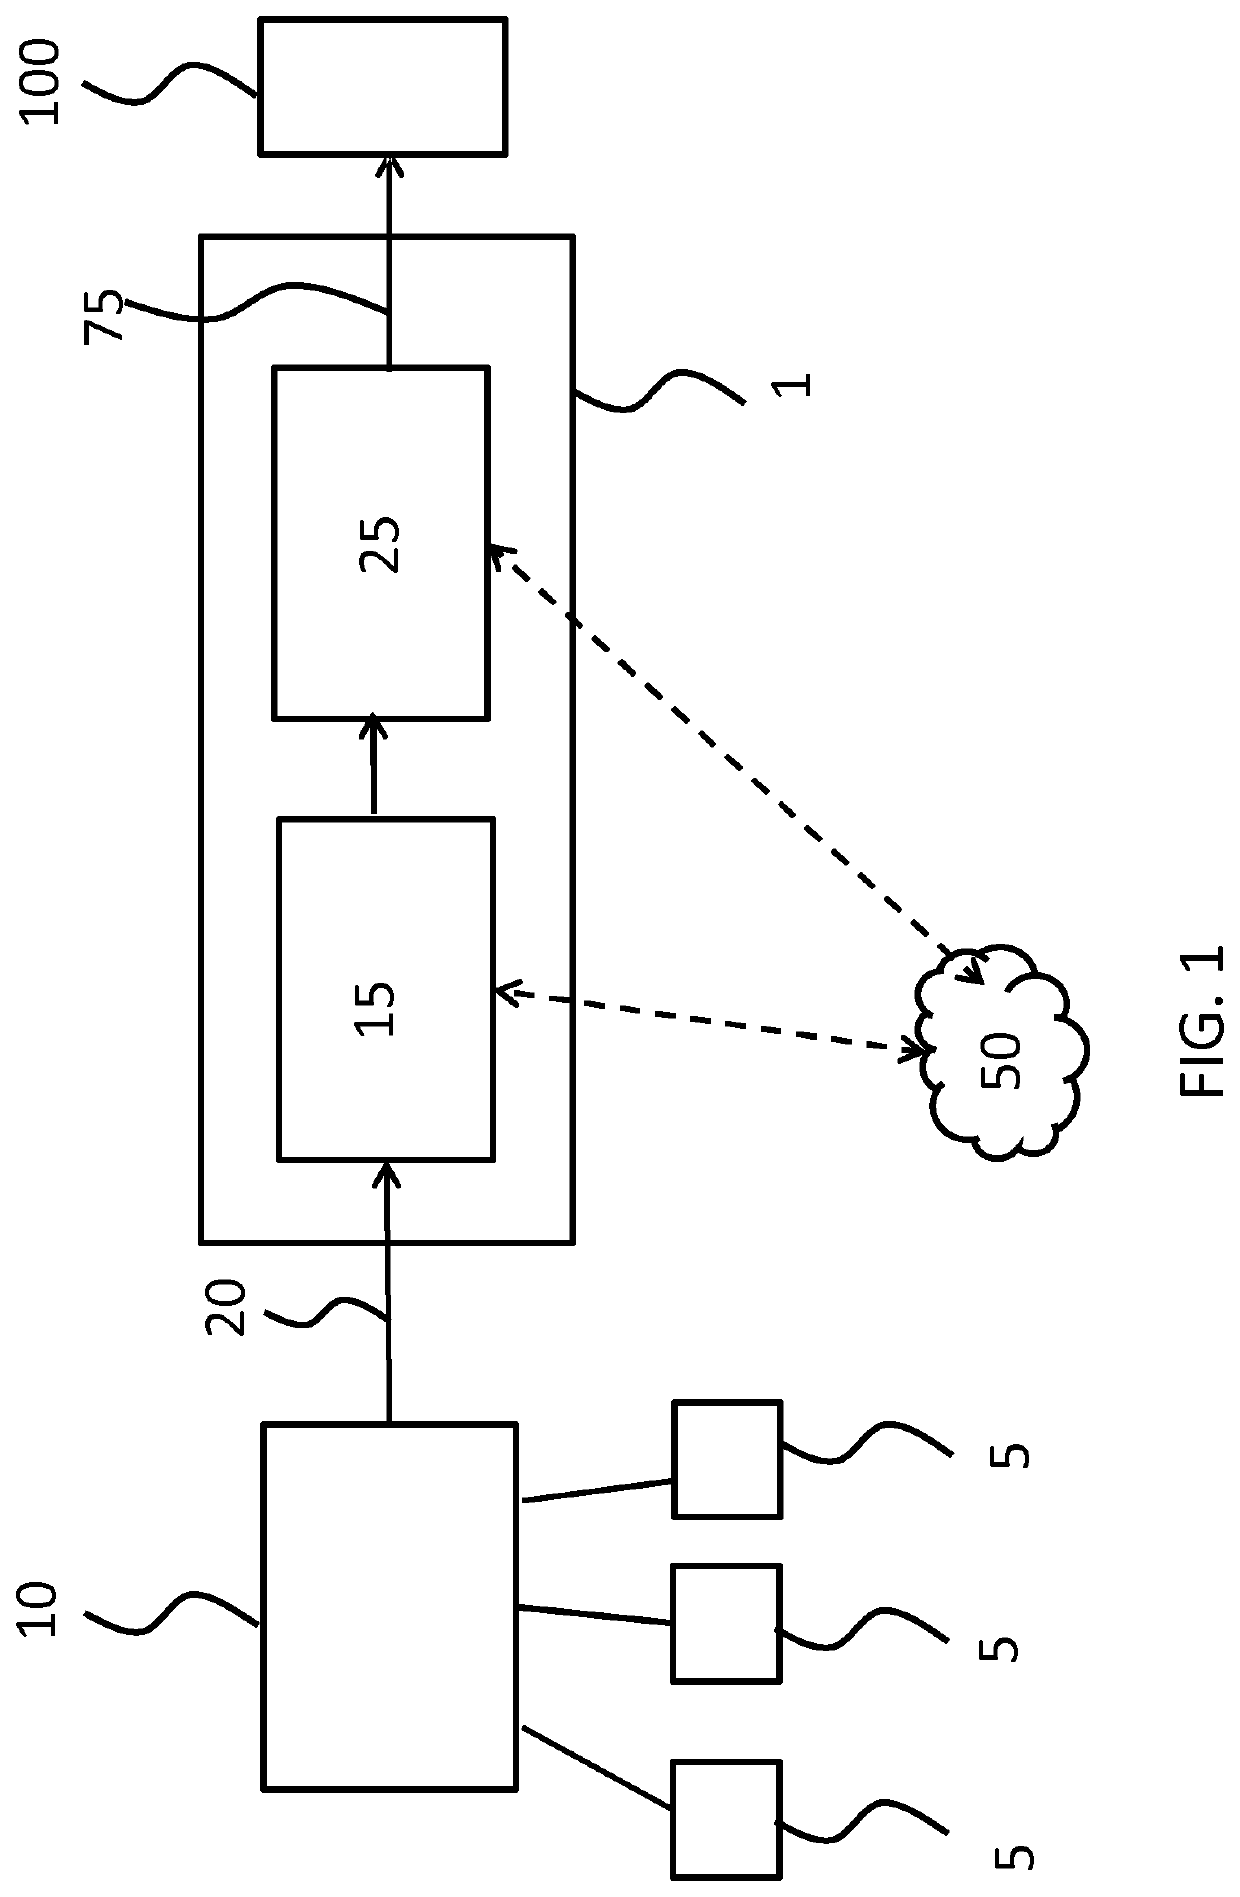 System and method for monitoring activities of daily living of a person